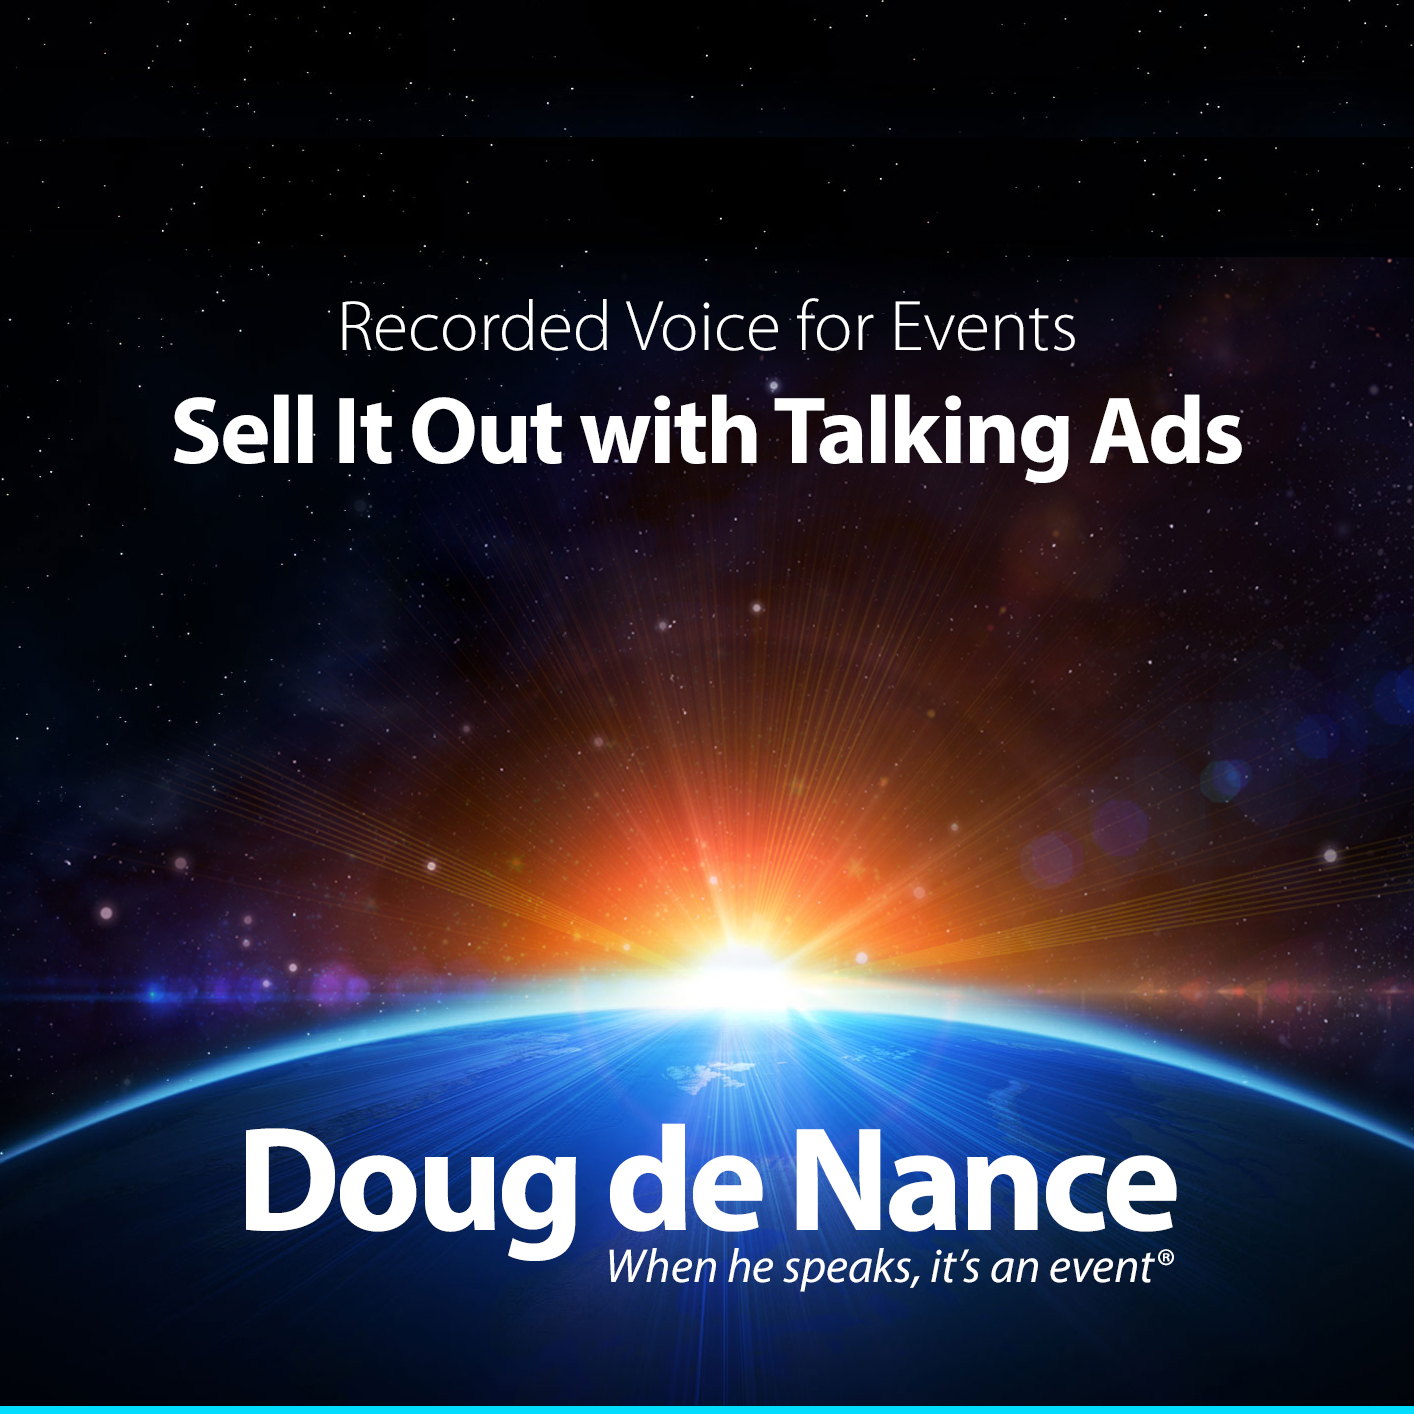 Sell it out with talking ads